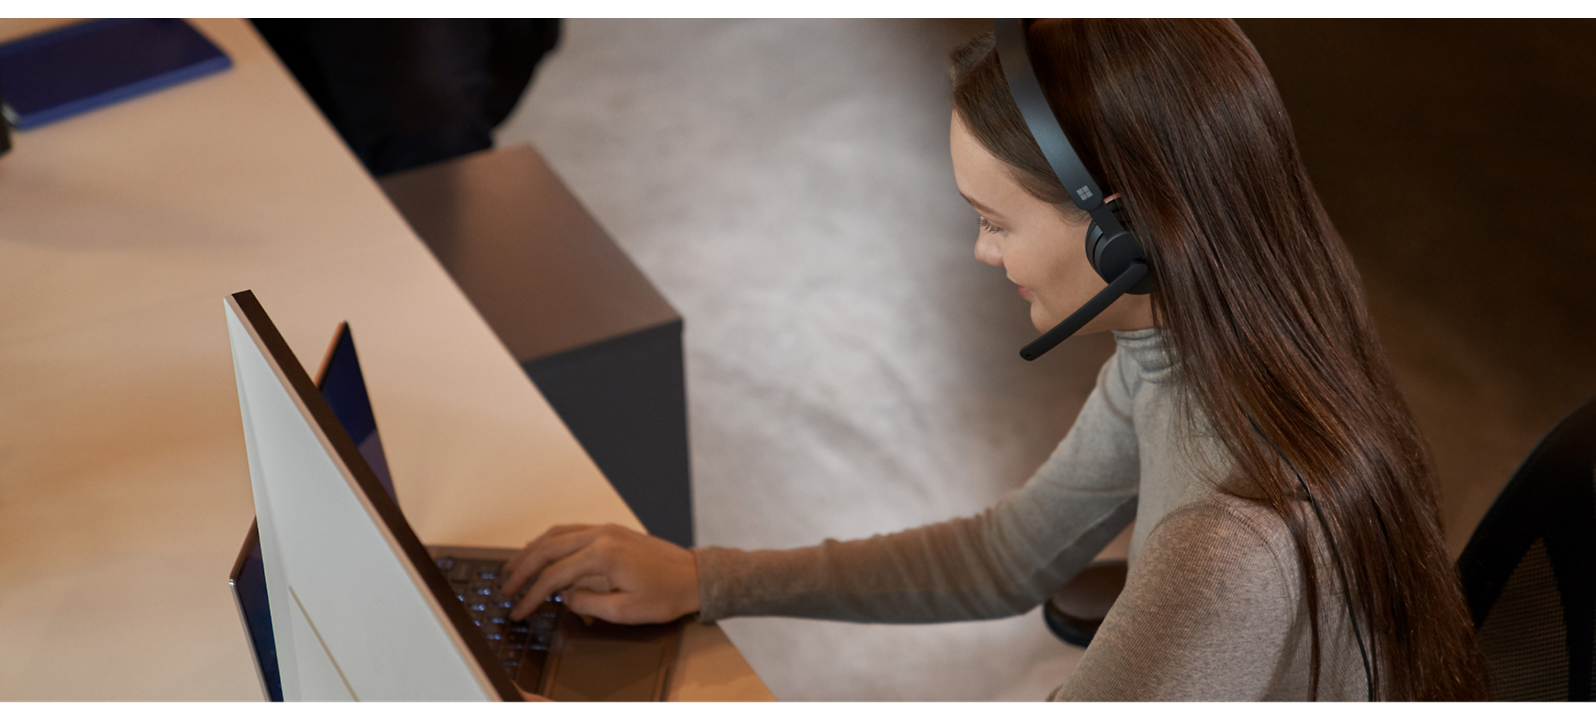 Customer service representative working on a computer while wearing a headset.